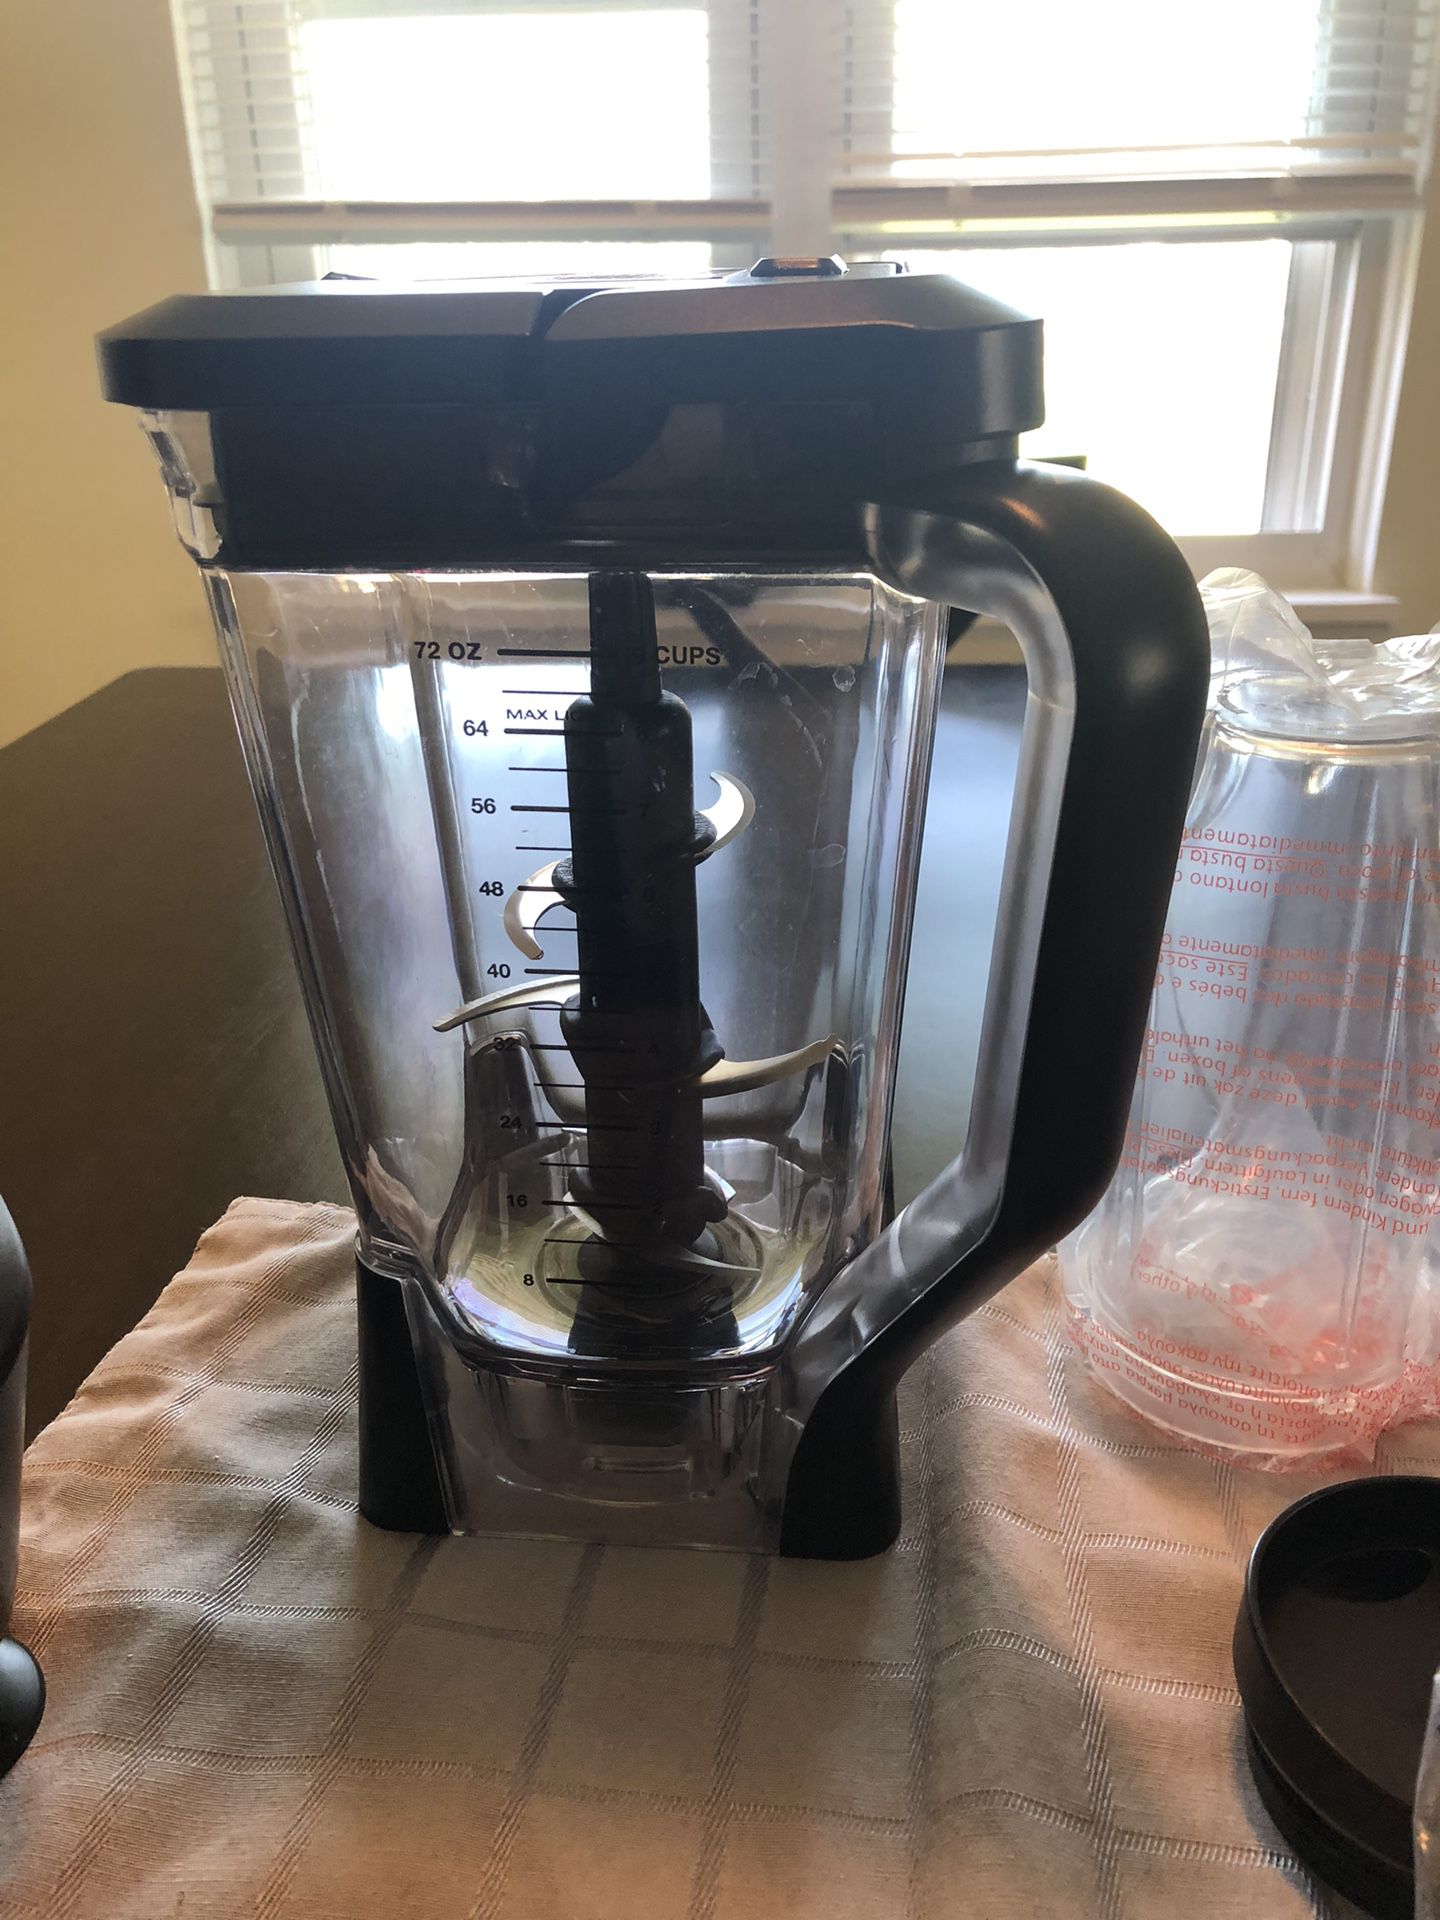 Ninja BL770 Mega Kitchen System, 1500W for Sale in Chicago, IL - OfferUp